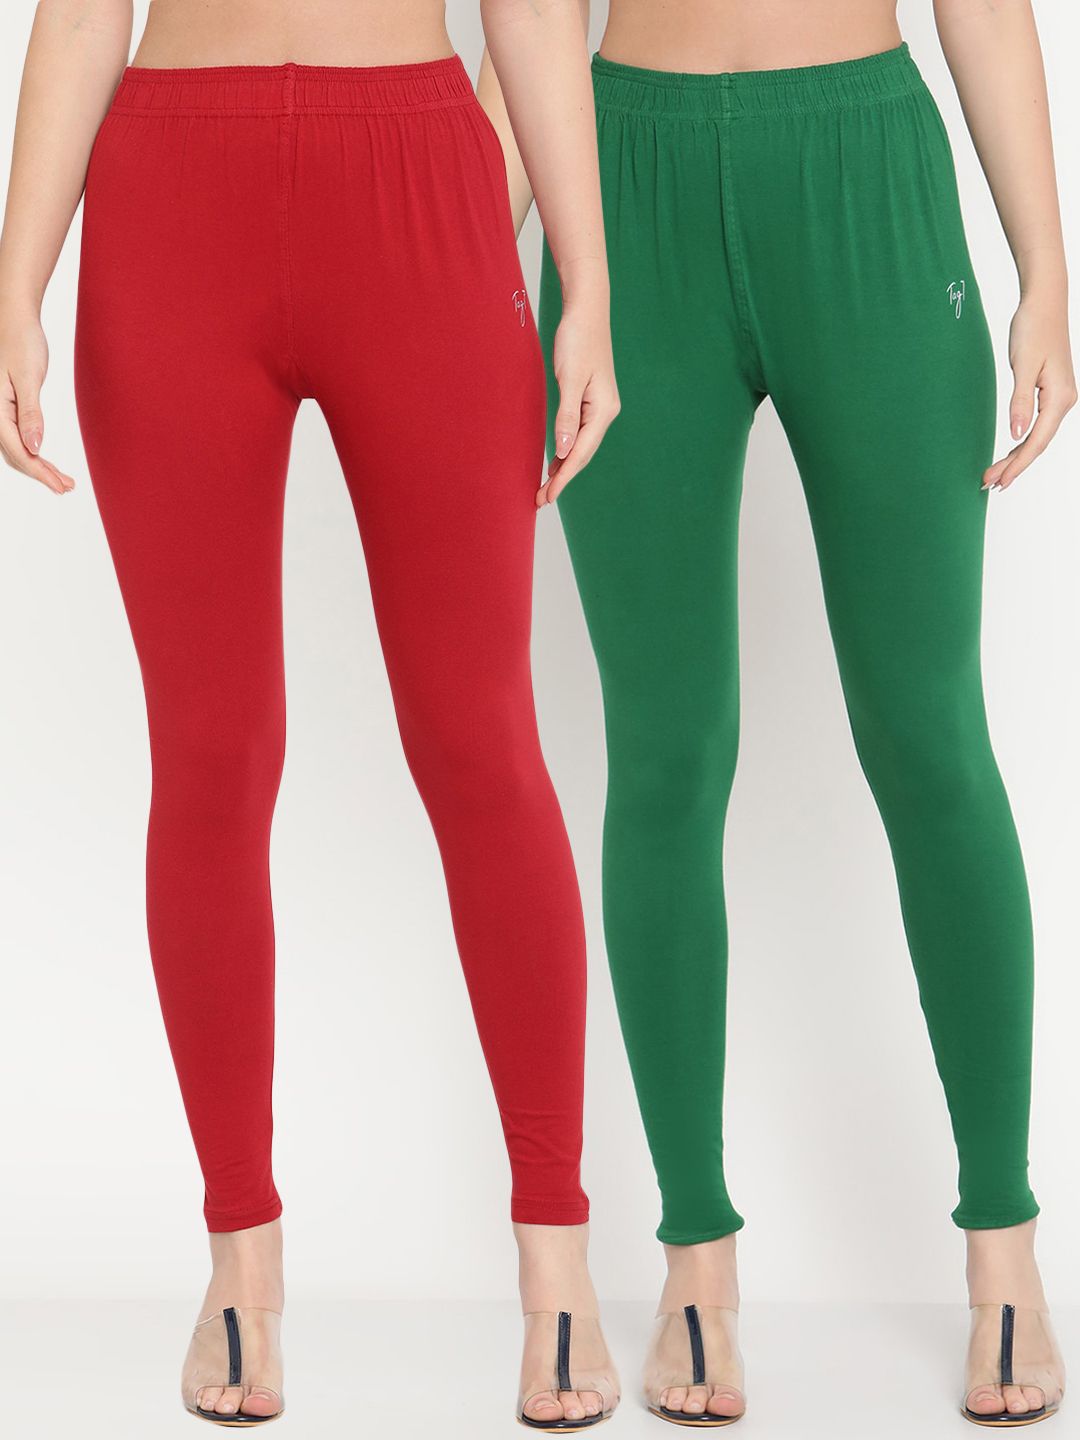 TAG 7 Women Pack Of 2 Maroon & Green Solid Ankle-Length Leggings Price in India